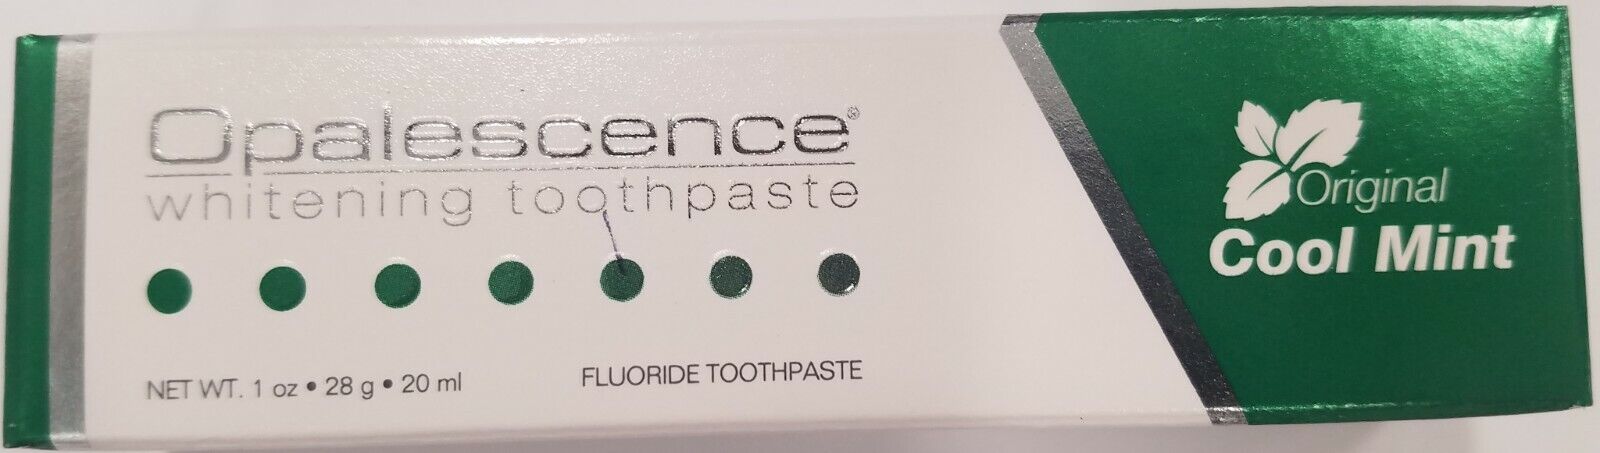 *2-Pack* Opalescence Whitening Toothpaste 1 Oz Fluoride Original Cool Mint 402 Opalescence UP-402 - фотография #2